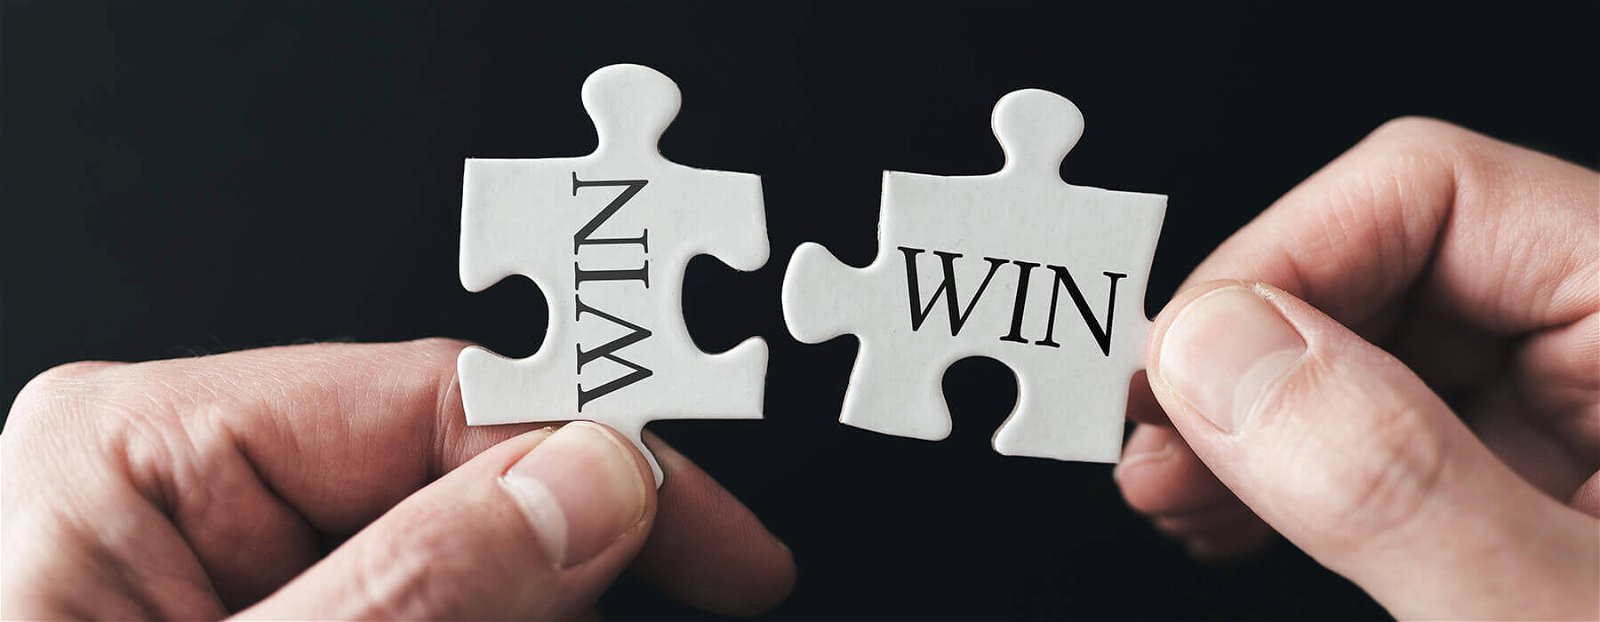 a set of hands try and fit two mismatched puzzle pieces that say "win" together